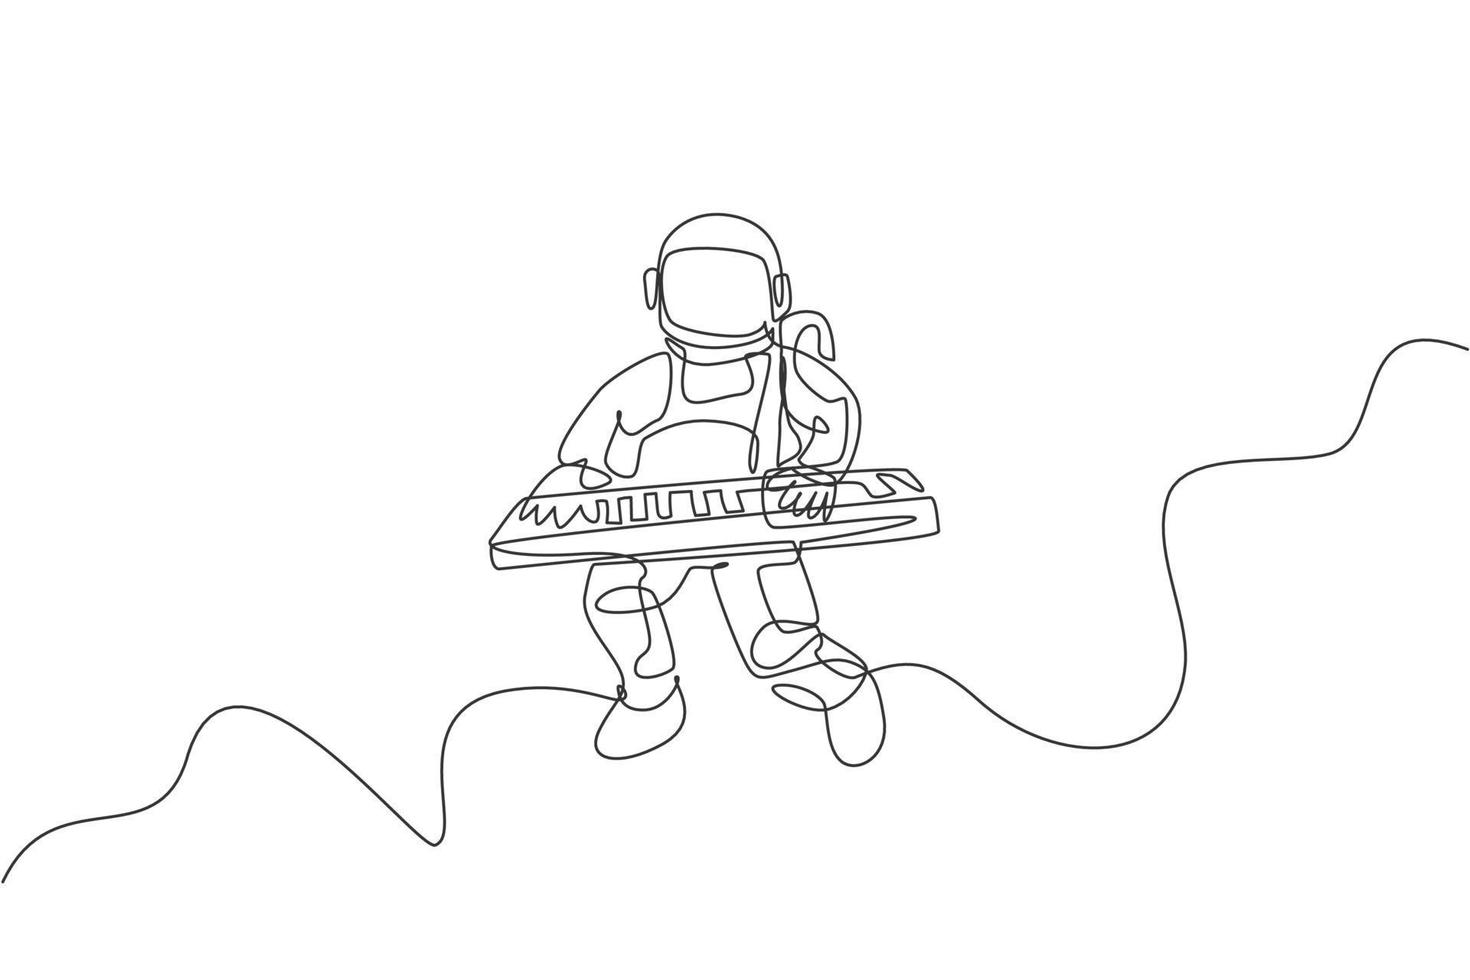 Single continuous line drawing of astronaut keyboardist playing keyboard musical instrument in cosmic galaxy. Deep space music concert concept. Trendy one line draw graphic design vector illustration